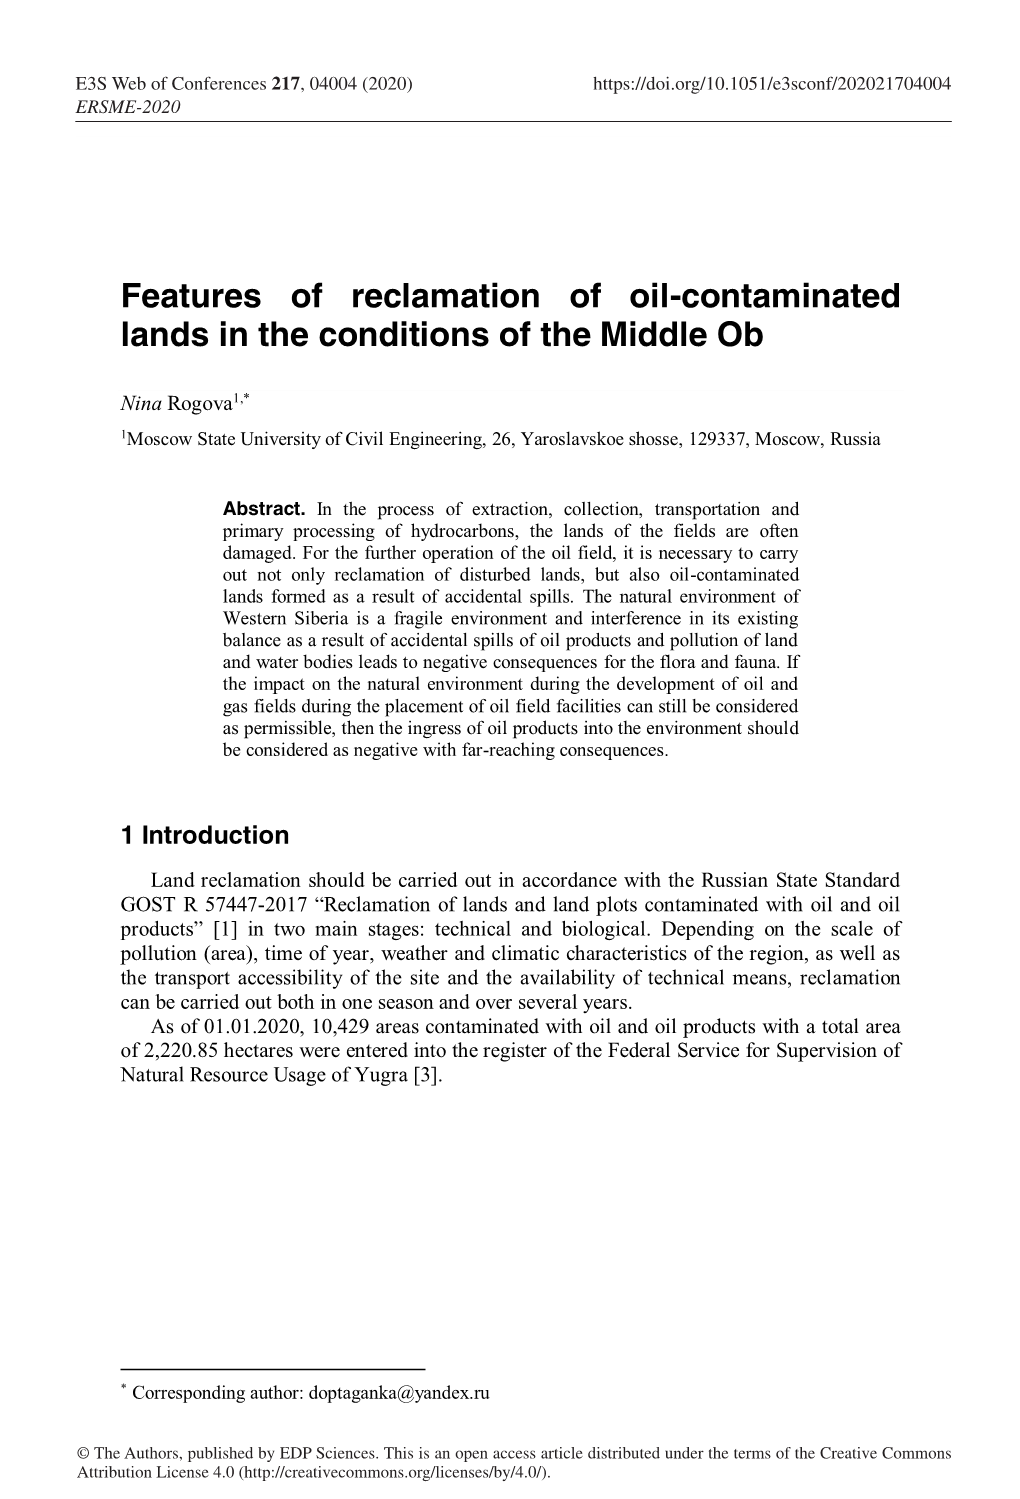 Features of Reclamation of Oil-Contaminated Lands in the Conditions of the Middle Ob